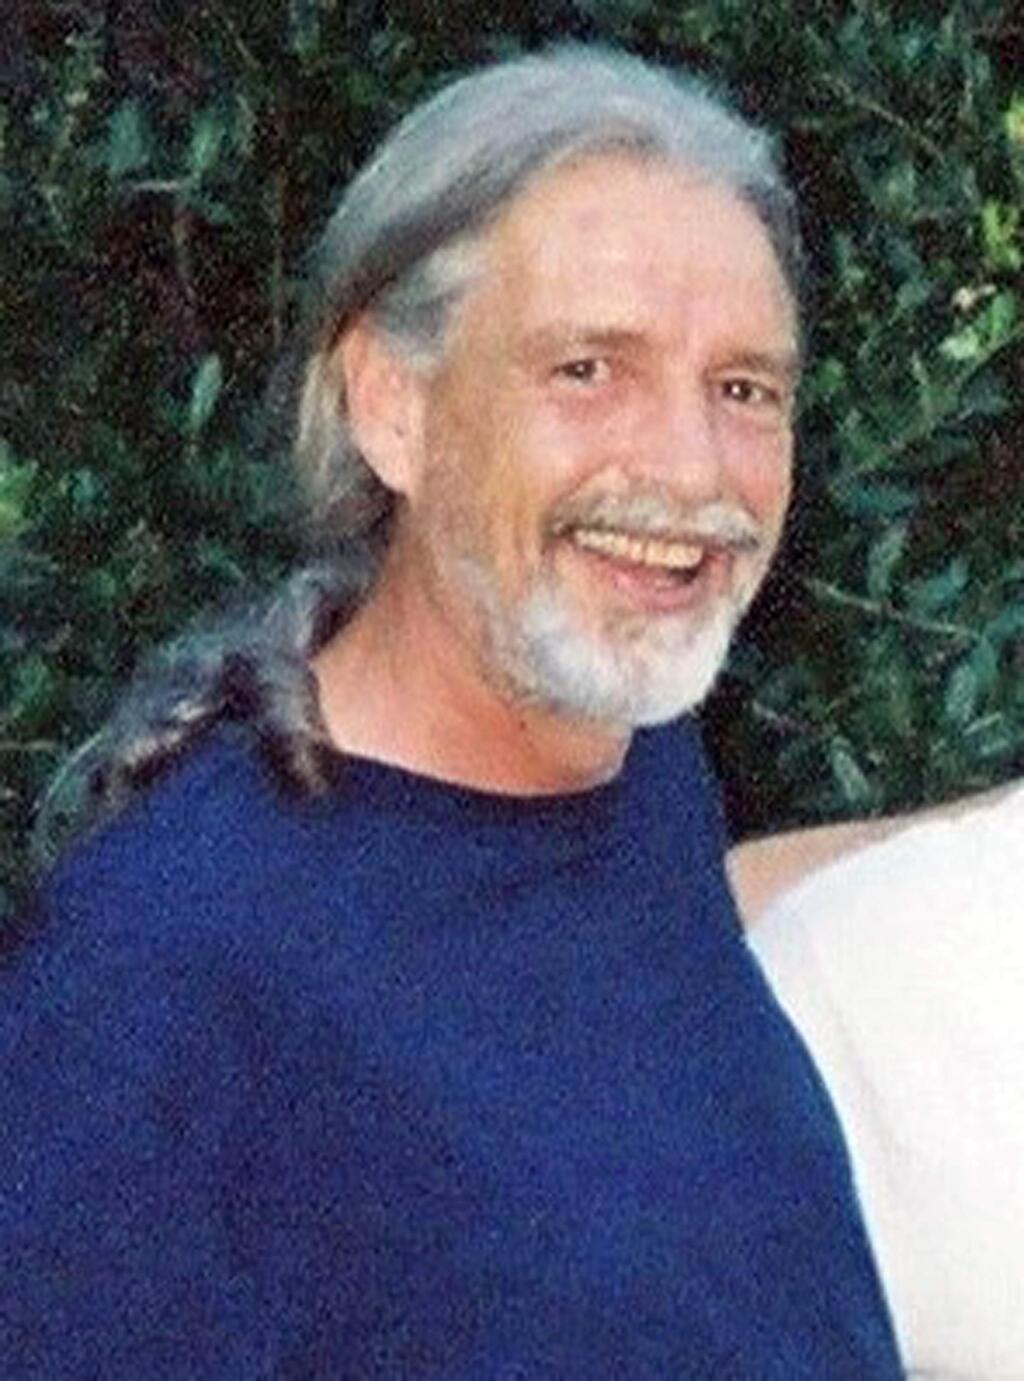 This undated photo released by the San Francisco Police Department shows Brian Egg, who has been reported missing for weeks, as they seek the public's help in locating him. San Francisco police said Tuesday, Aug. 28, 2018 that they found human remains in a fish tank inside Egg's home on Aug. 17. Investigators are awaiting the results of an autopsy and identification of the body. (San Francisco Police Department via AP)